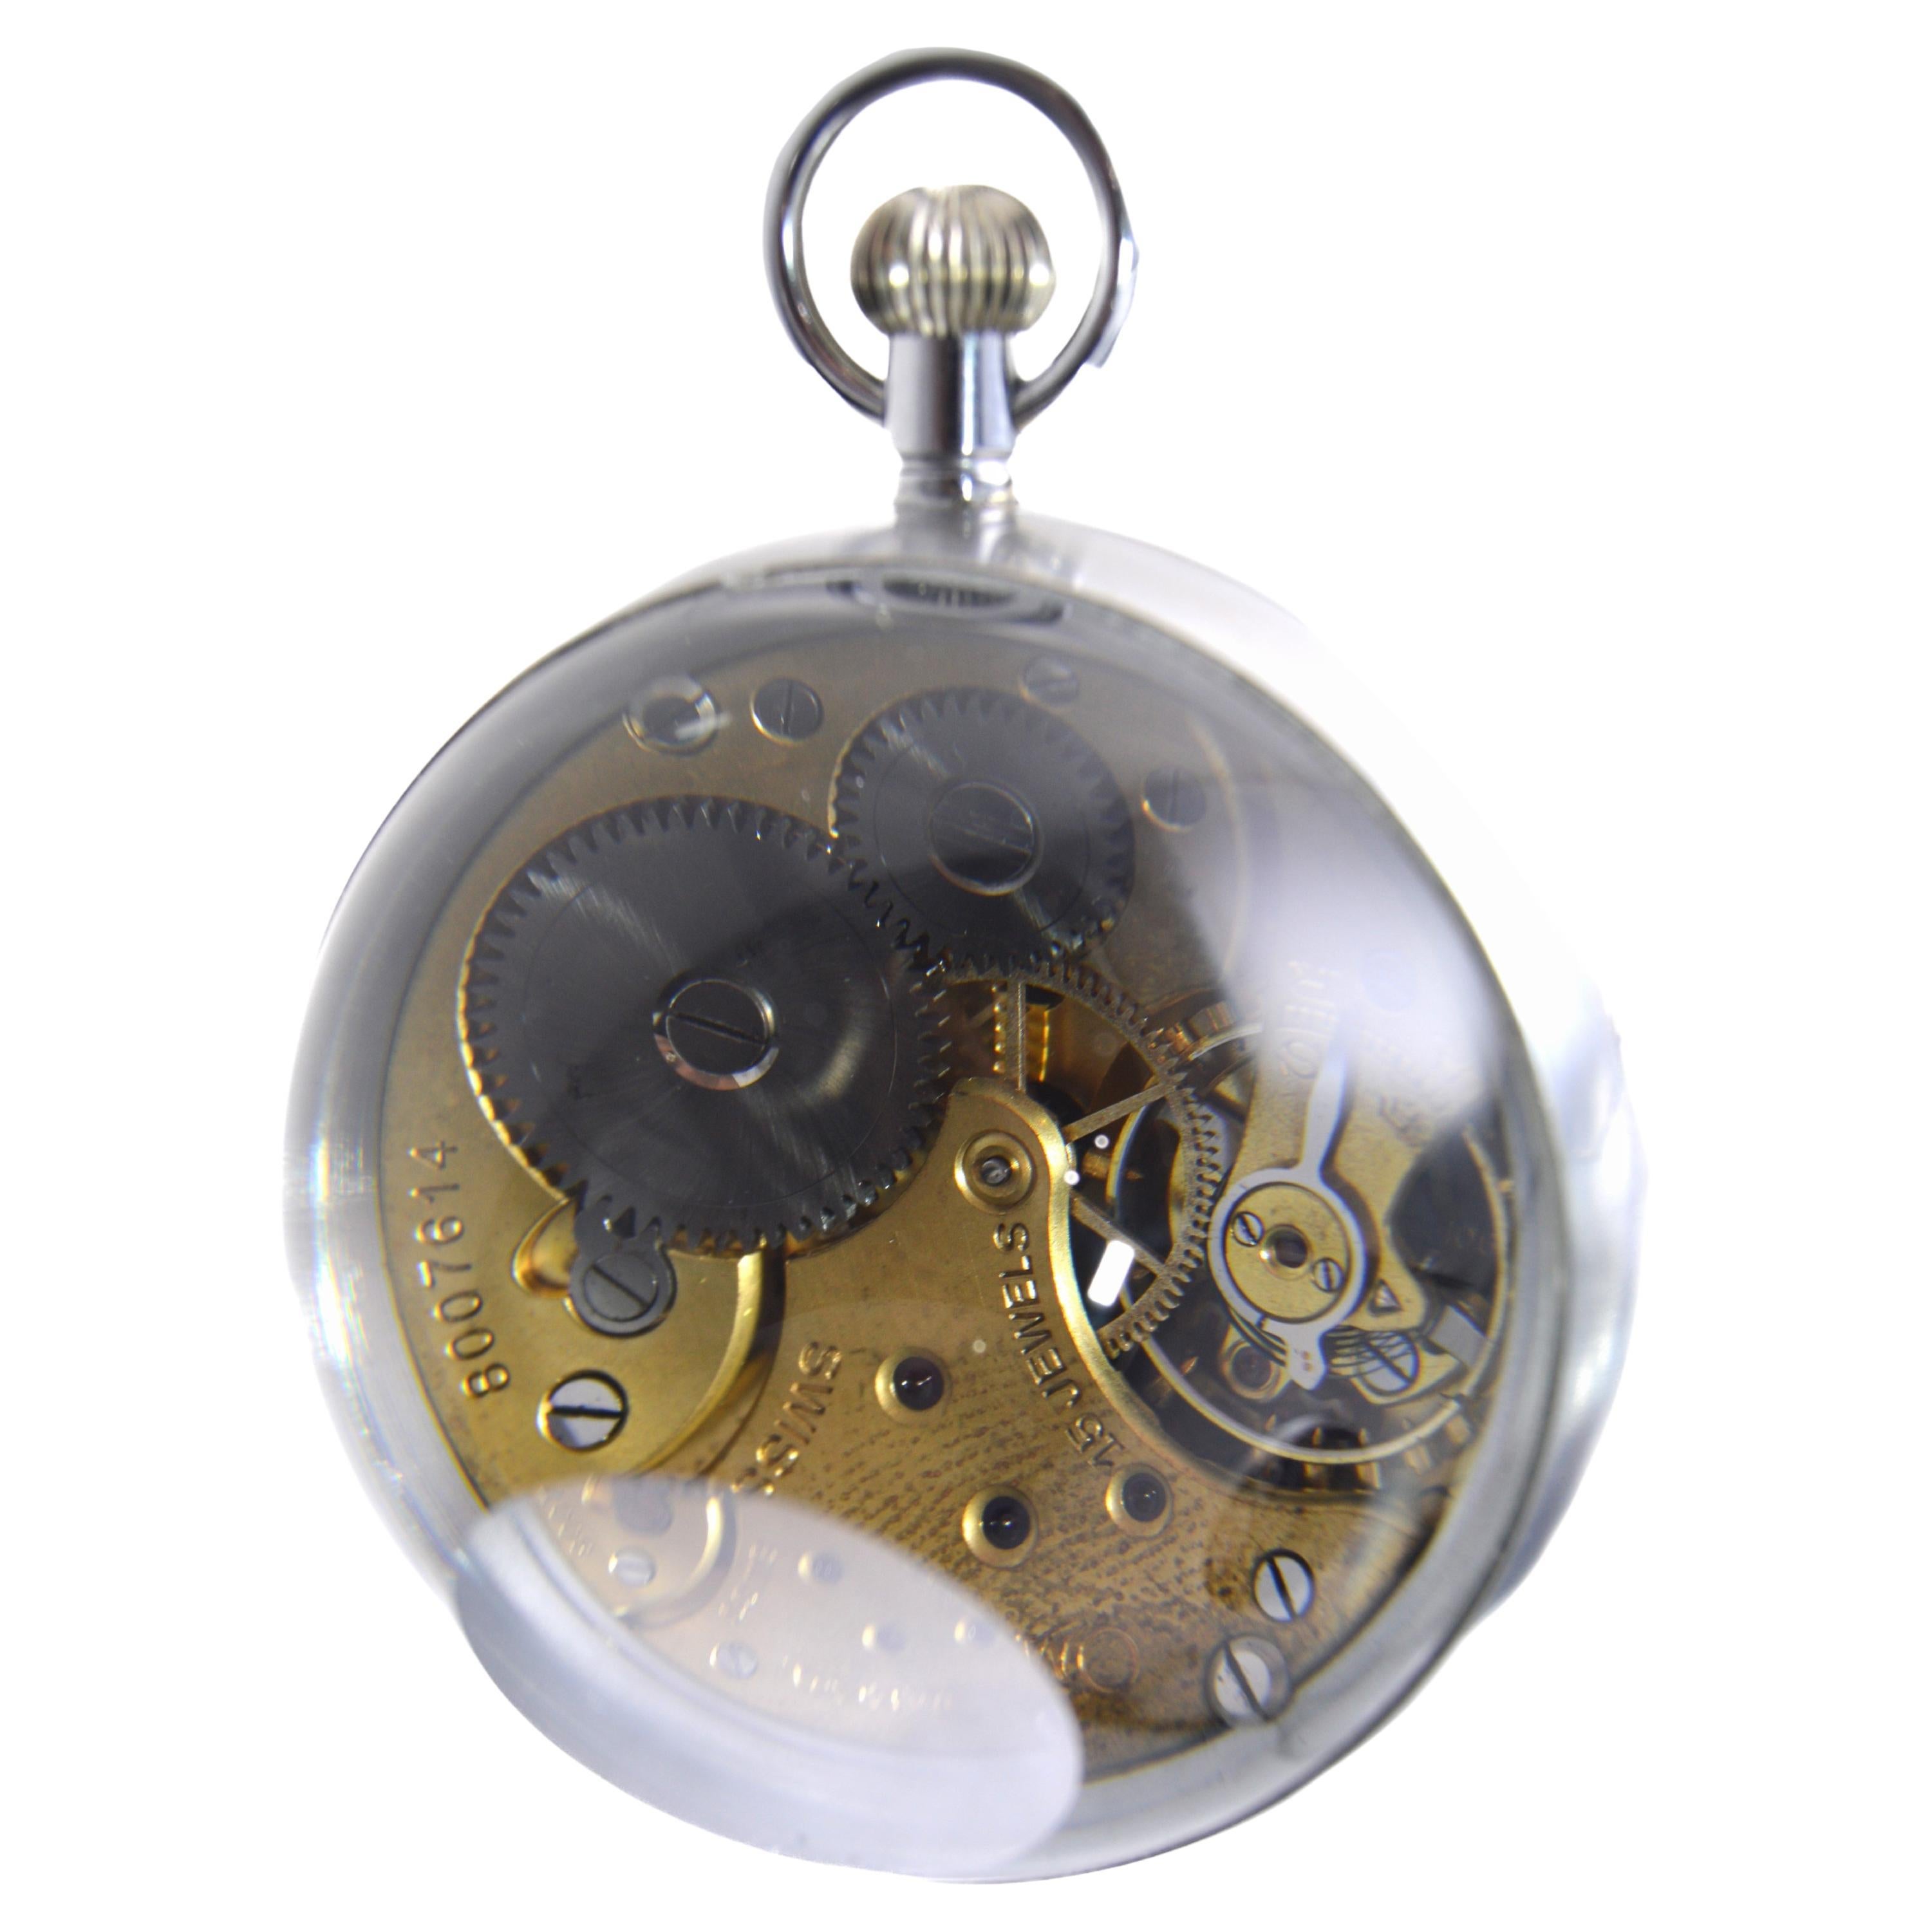 FACTORY / HOUSE:  Omega Watch Company
STYLE / REFERENCE: Art Deco Ball Clock 
MOVEMENT / CALIBER: Manual Winding / 15 Jewels / Gilt Plates
DIAL / HANDS: Breguet Style Arabic Numerals / Blued Steel Breguet Hands 
DIMENSIONS: 2.5 Inches in